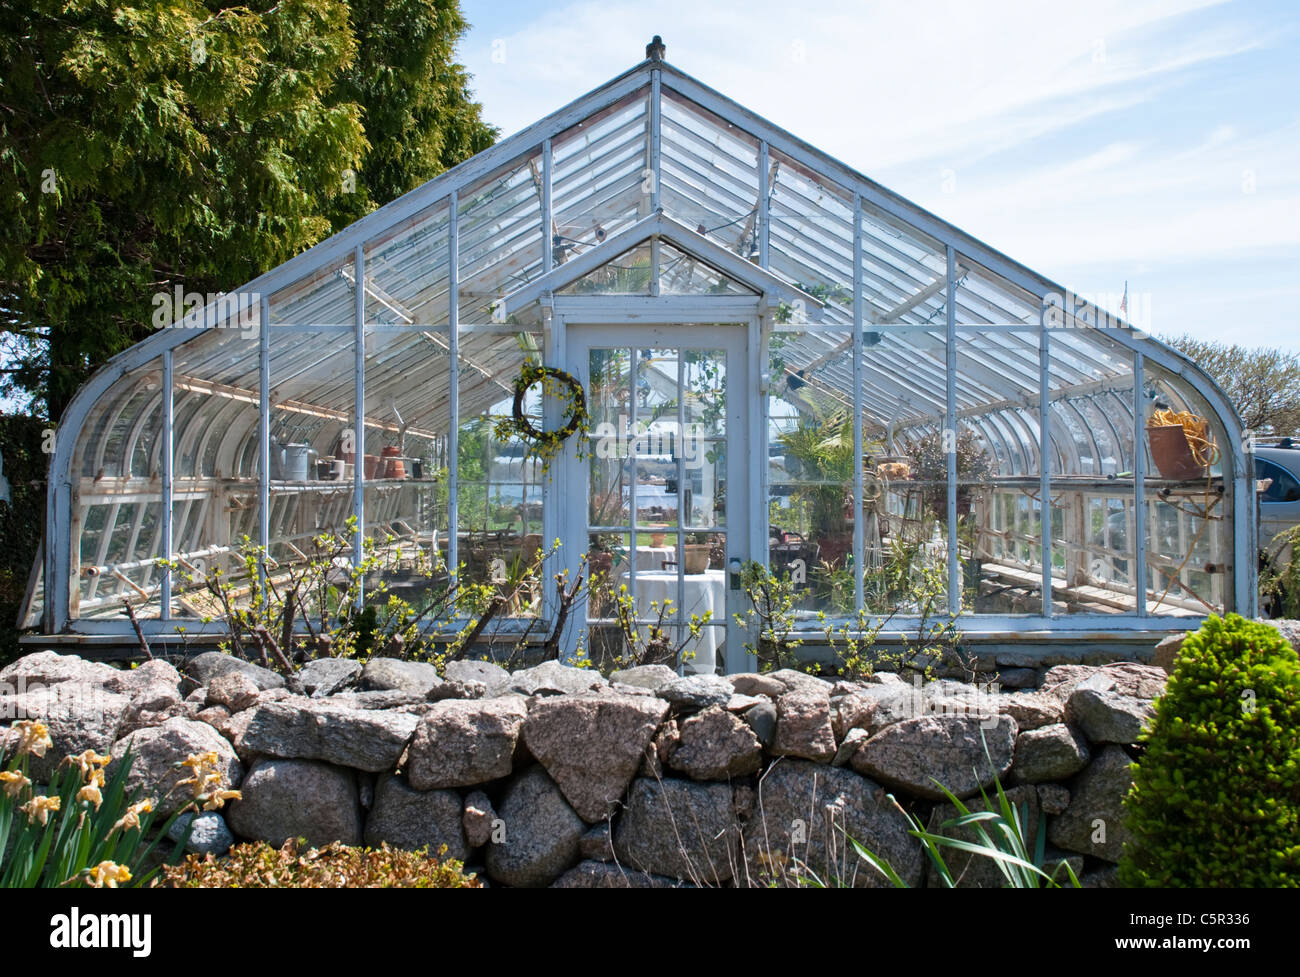 The growing season is just starting in this greenhouse in Westport. Stock Photo